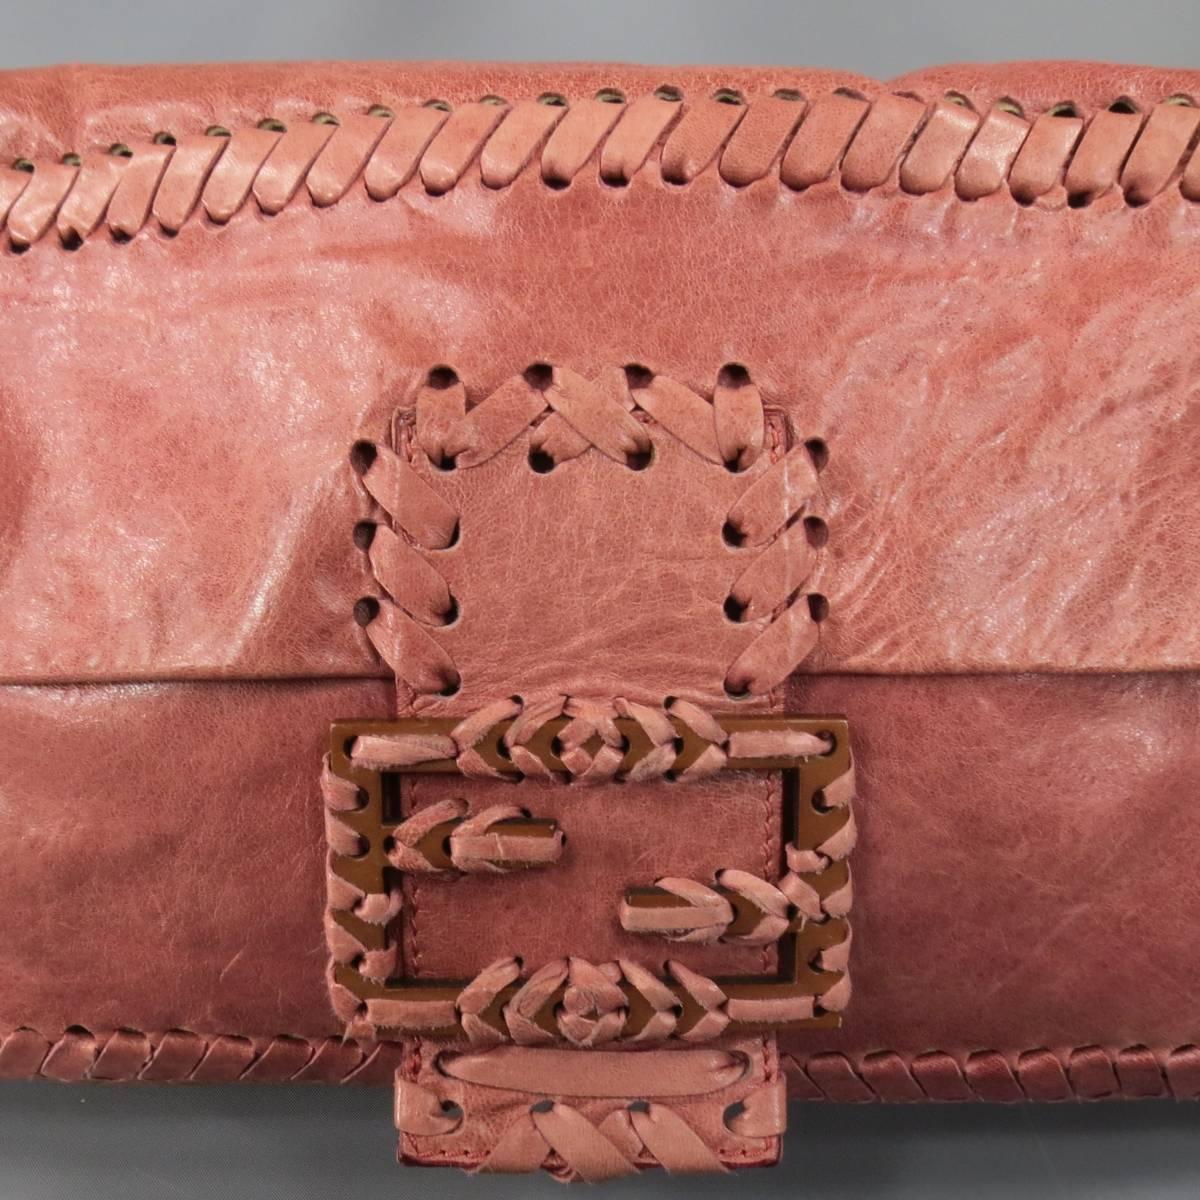 This gorgeous FENDI shoulder bag comes in a distressed dark pink leather and features whipstitch details throughout, rectangular shape, flap snap closure with oversized whipstitch wooden logo, adjustable shoulder strap that can be removed to wear as